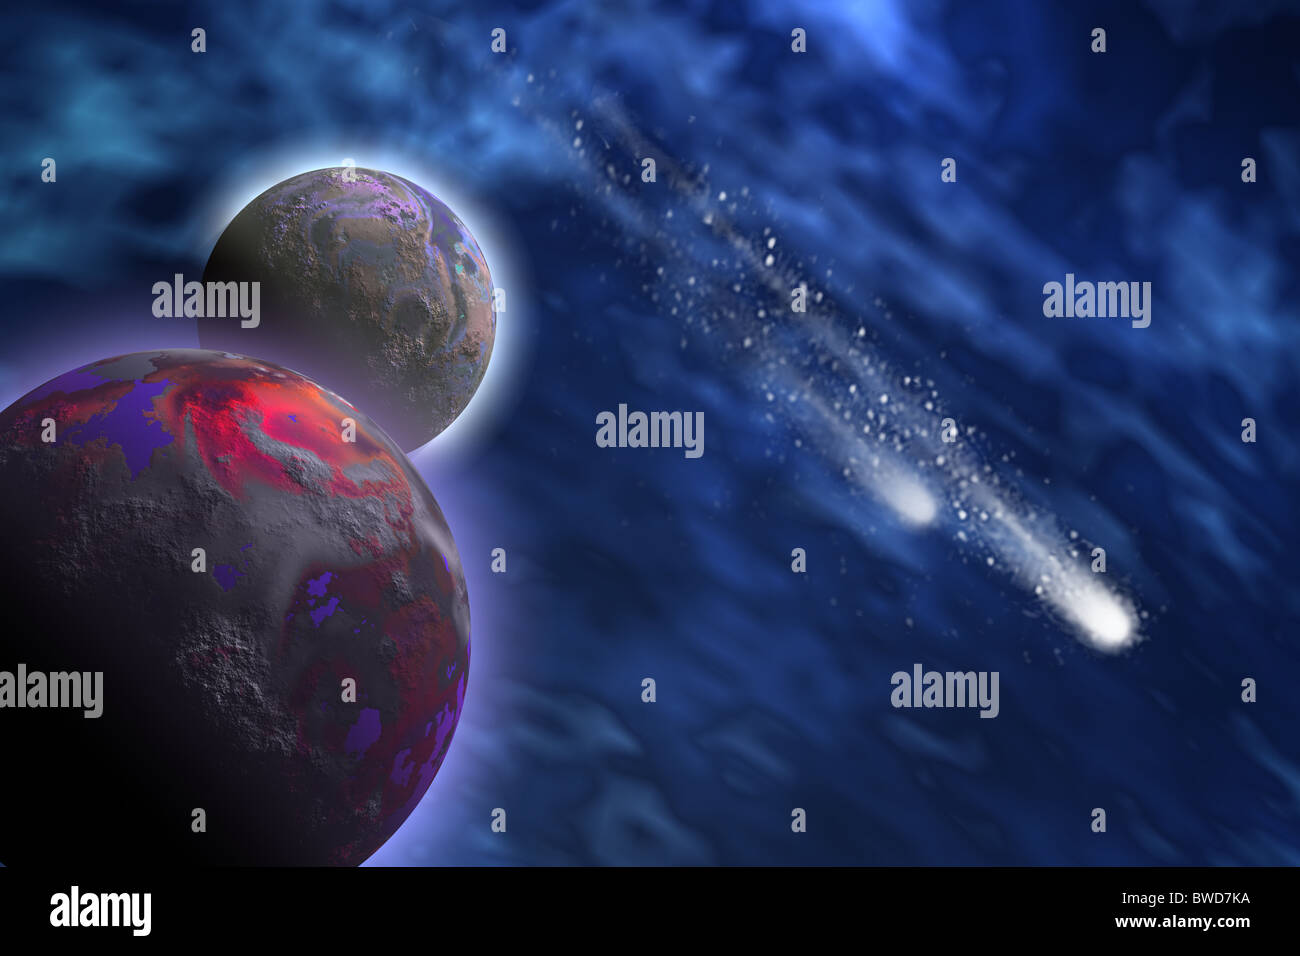 Cosmic Starlets - Two bright comets shoot past a planet and its moon. Stock Photo